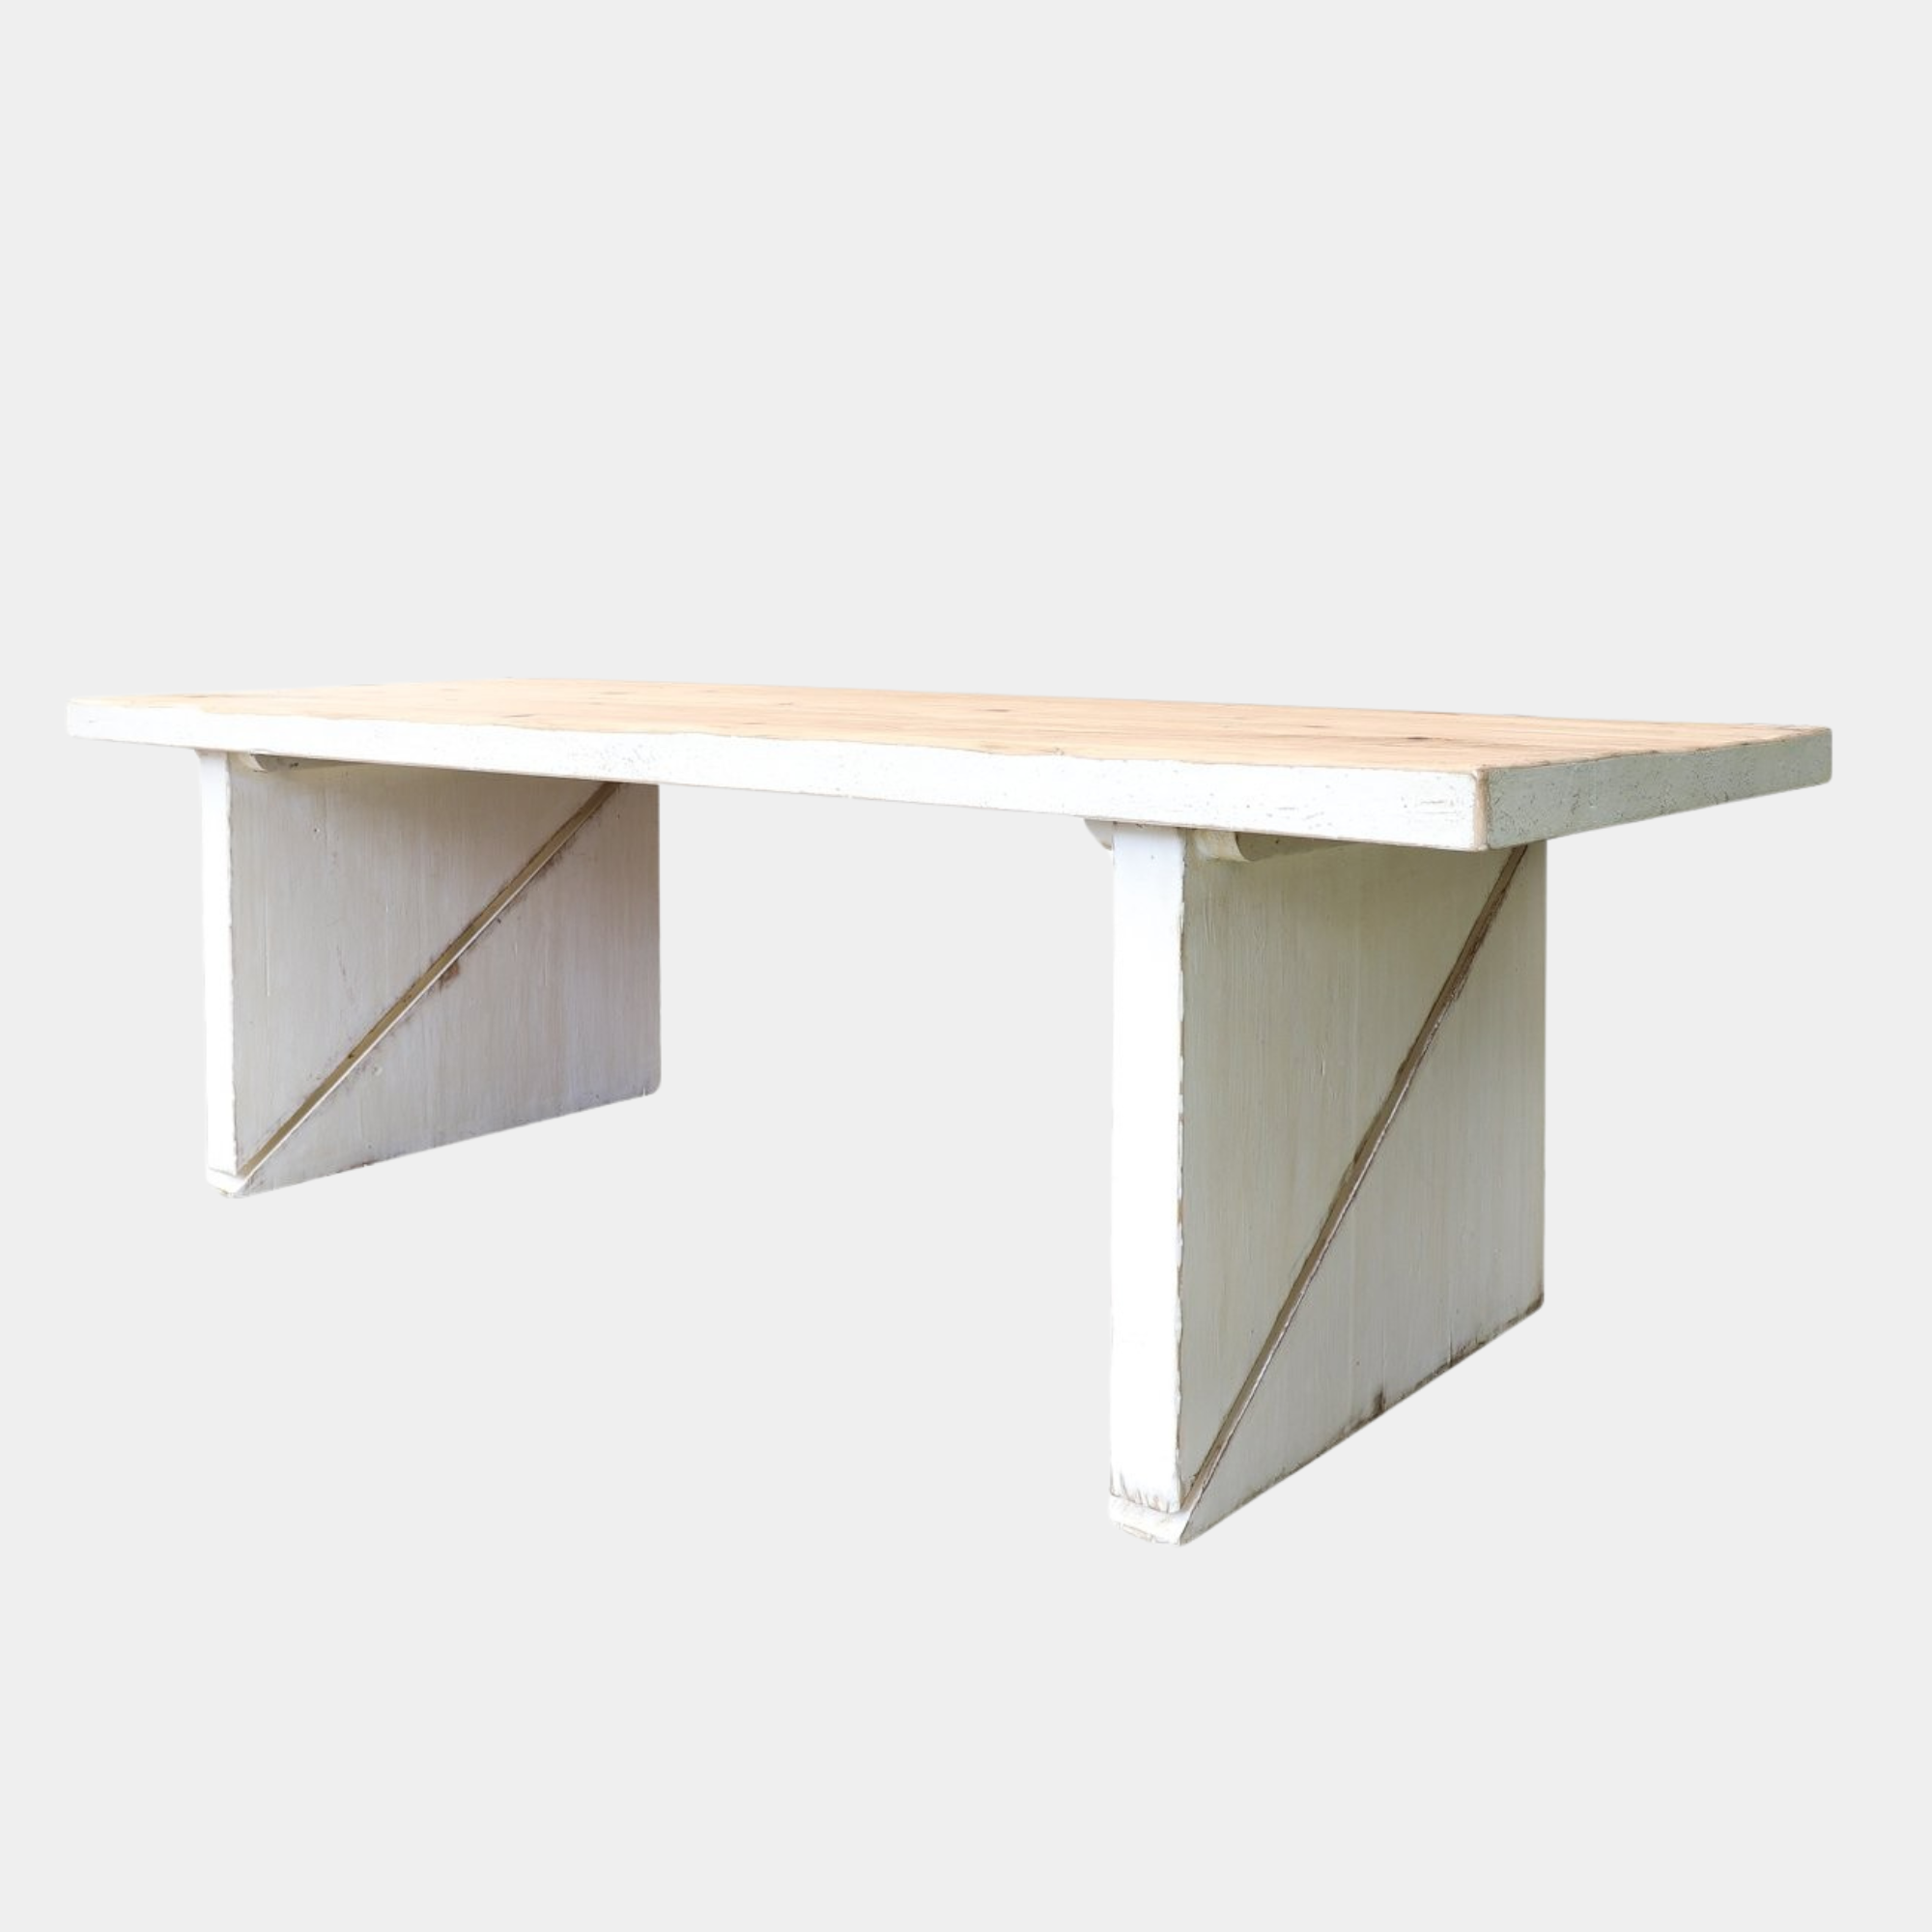 LIMITED EDITION | DINING TABLE